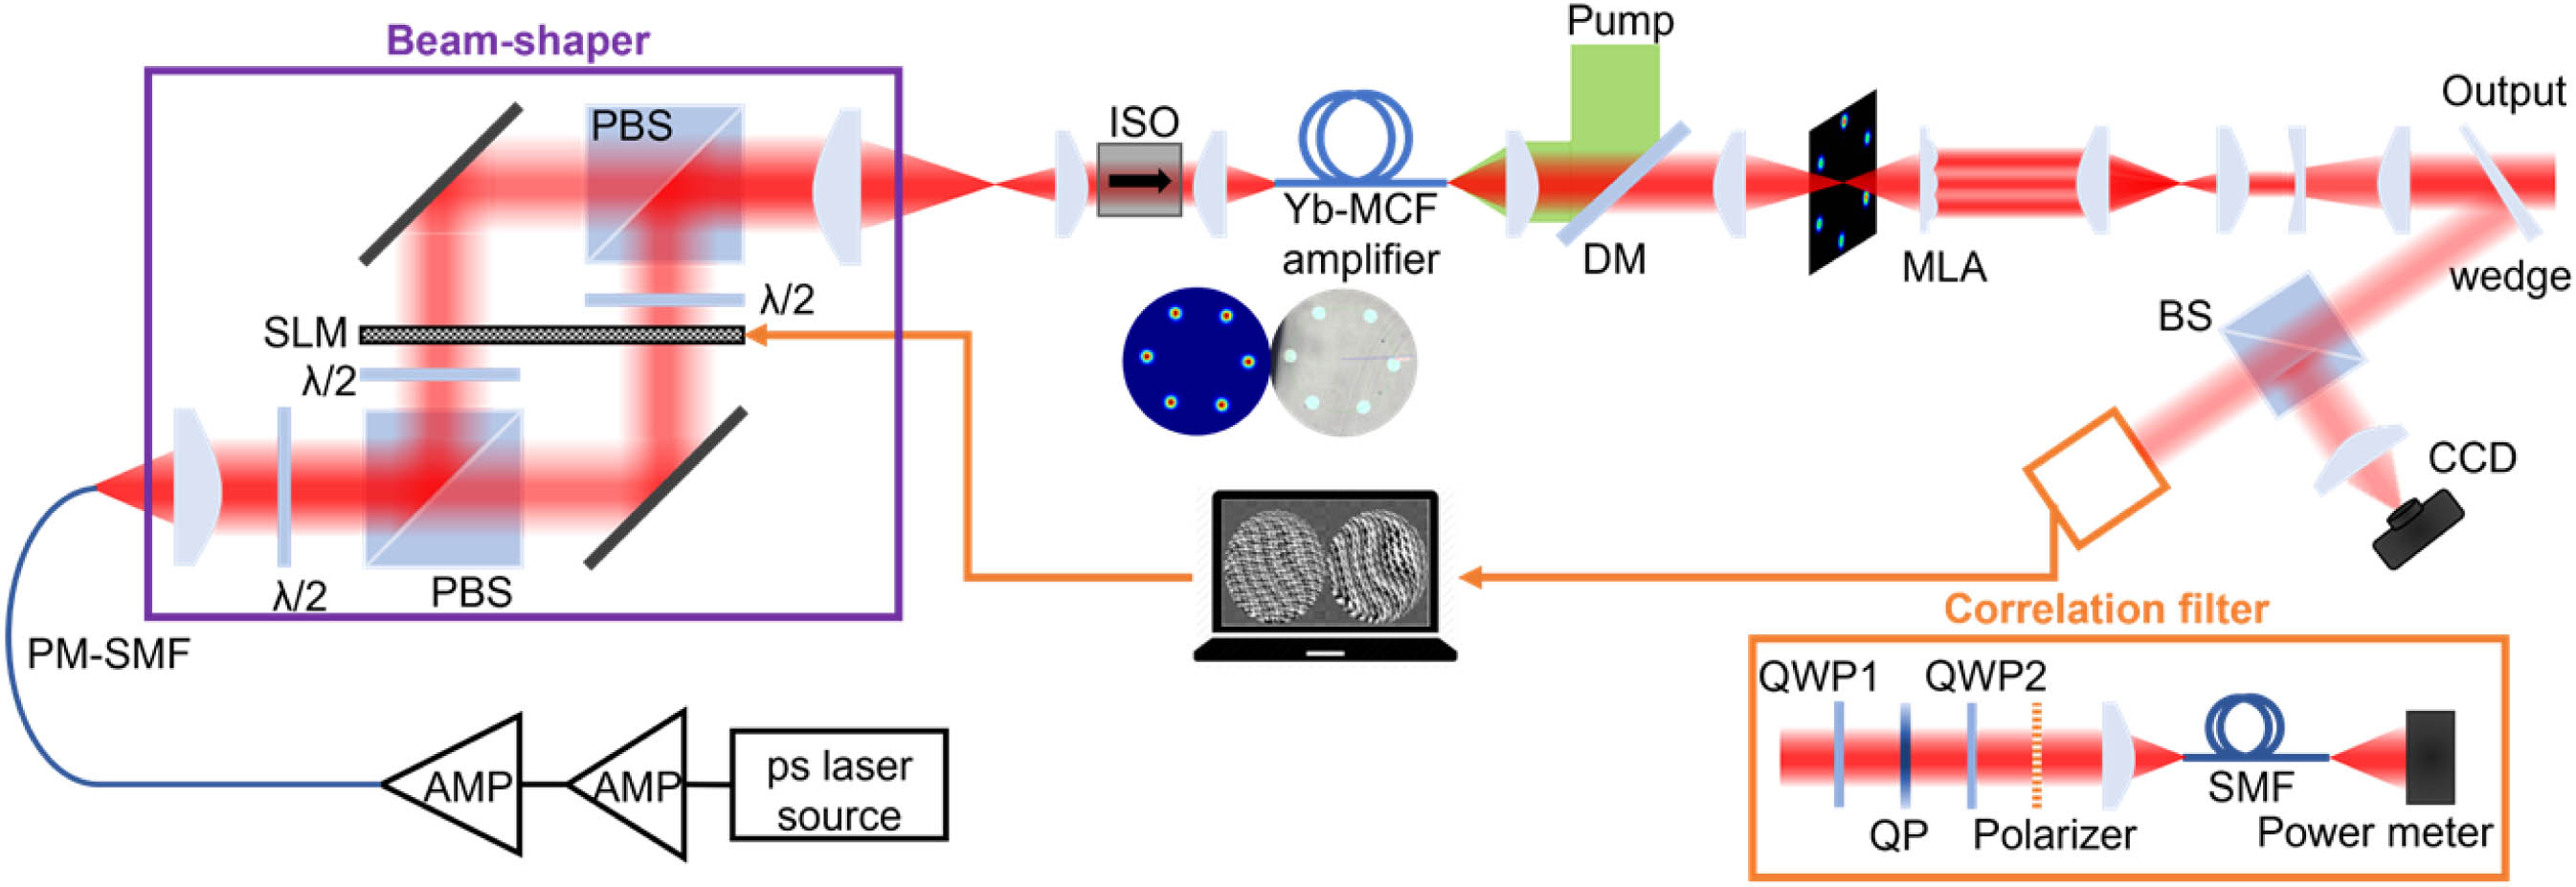 Schematic of the experimental setup. AMP, amplifier; PM, polarization-maintaining; SMF, single-mode fiber; PBS, polarization beam splitter; λ/2, half-wave plate; ISO, isolator; DM, dichroic mirror; MLA, microlens array; BS, beam splitter; CCD, charge-coupled device; QWP, quarter-wave plate; QP, q-plate.